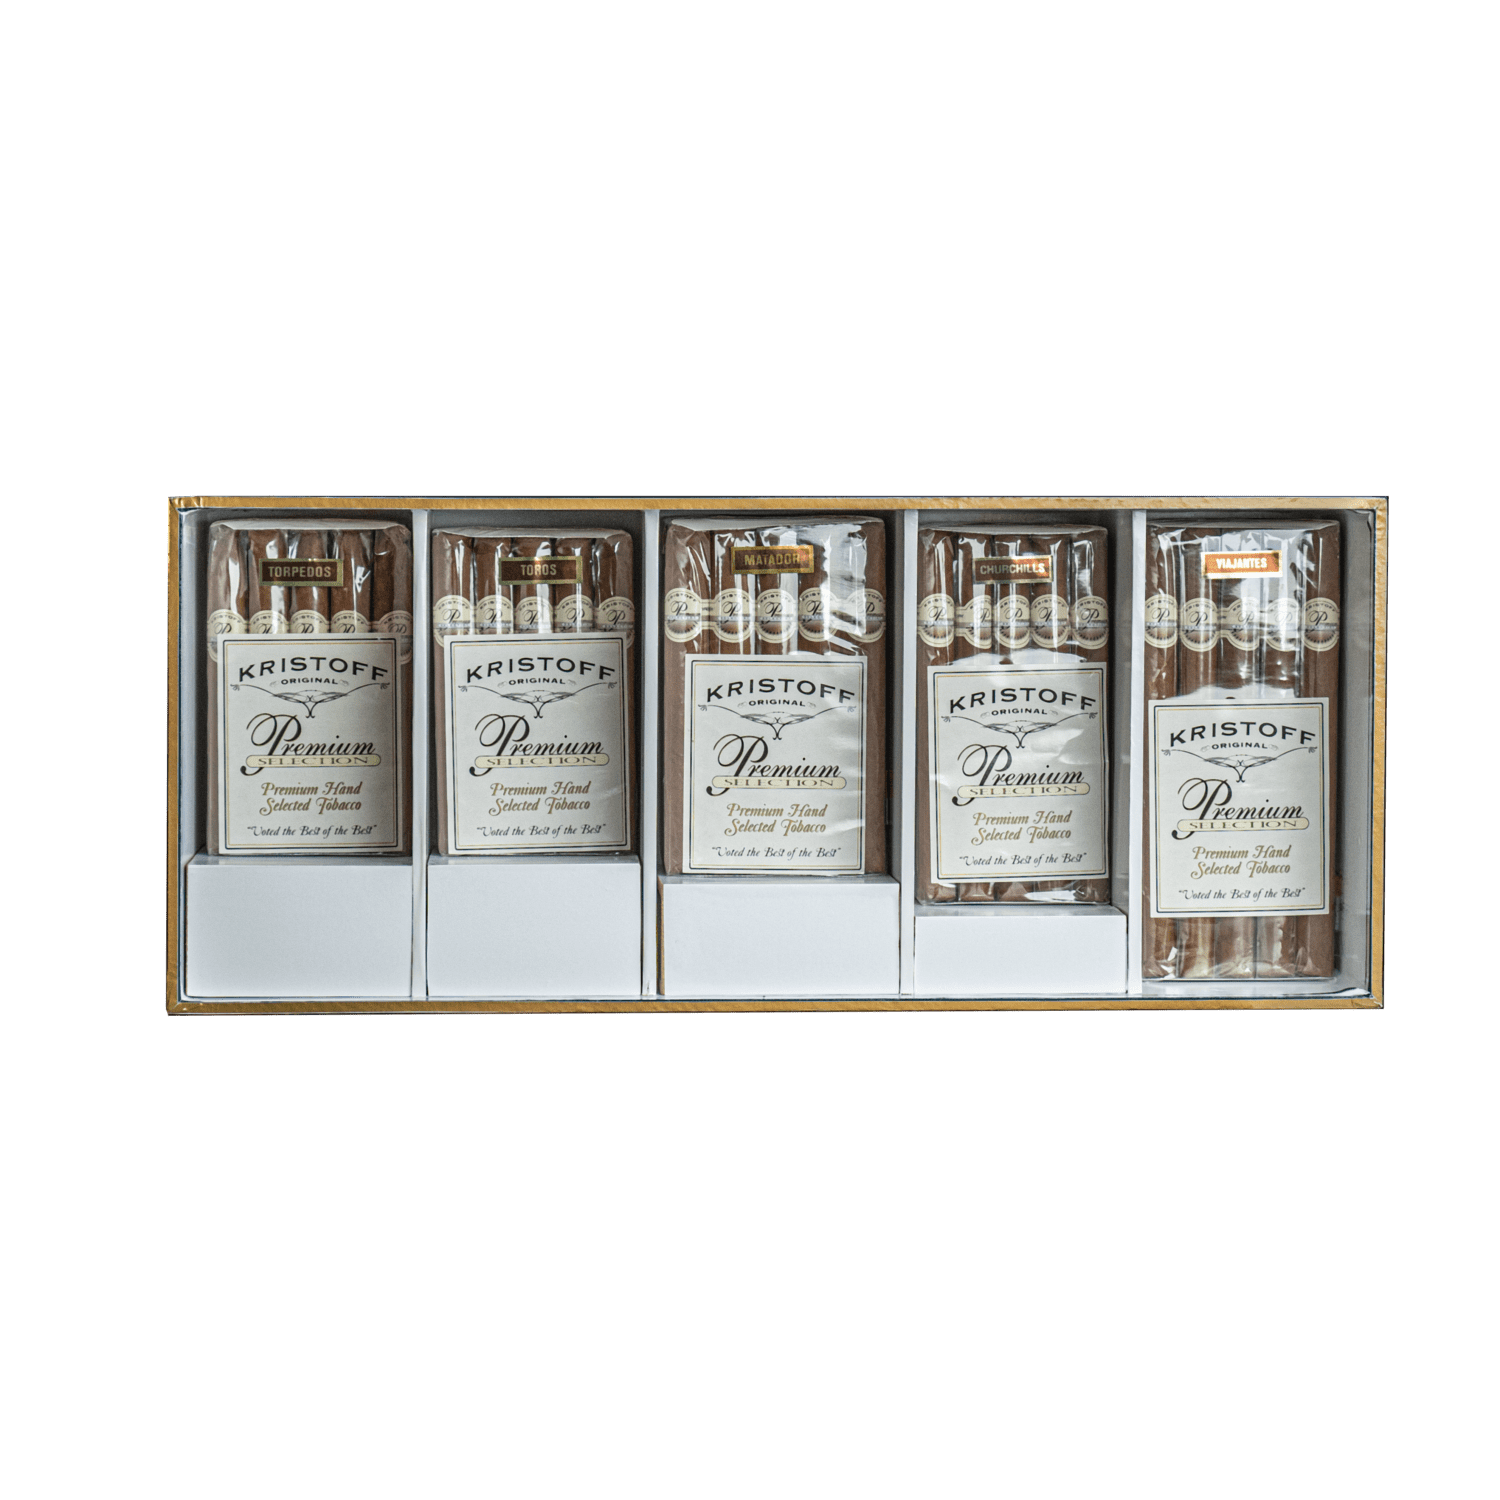 Kristoff Cigars: Premium Selection Highly Rated Cigar